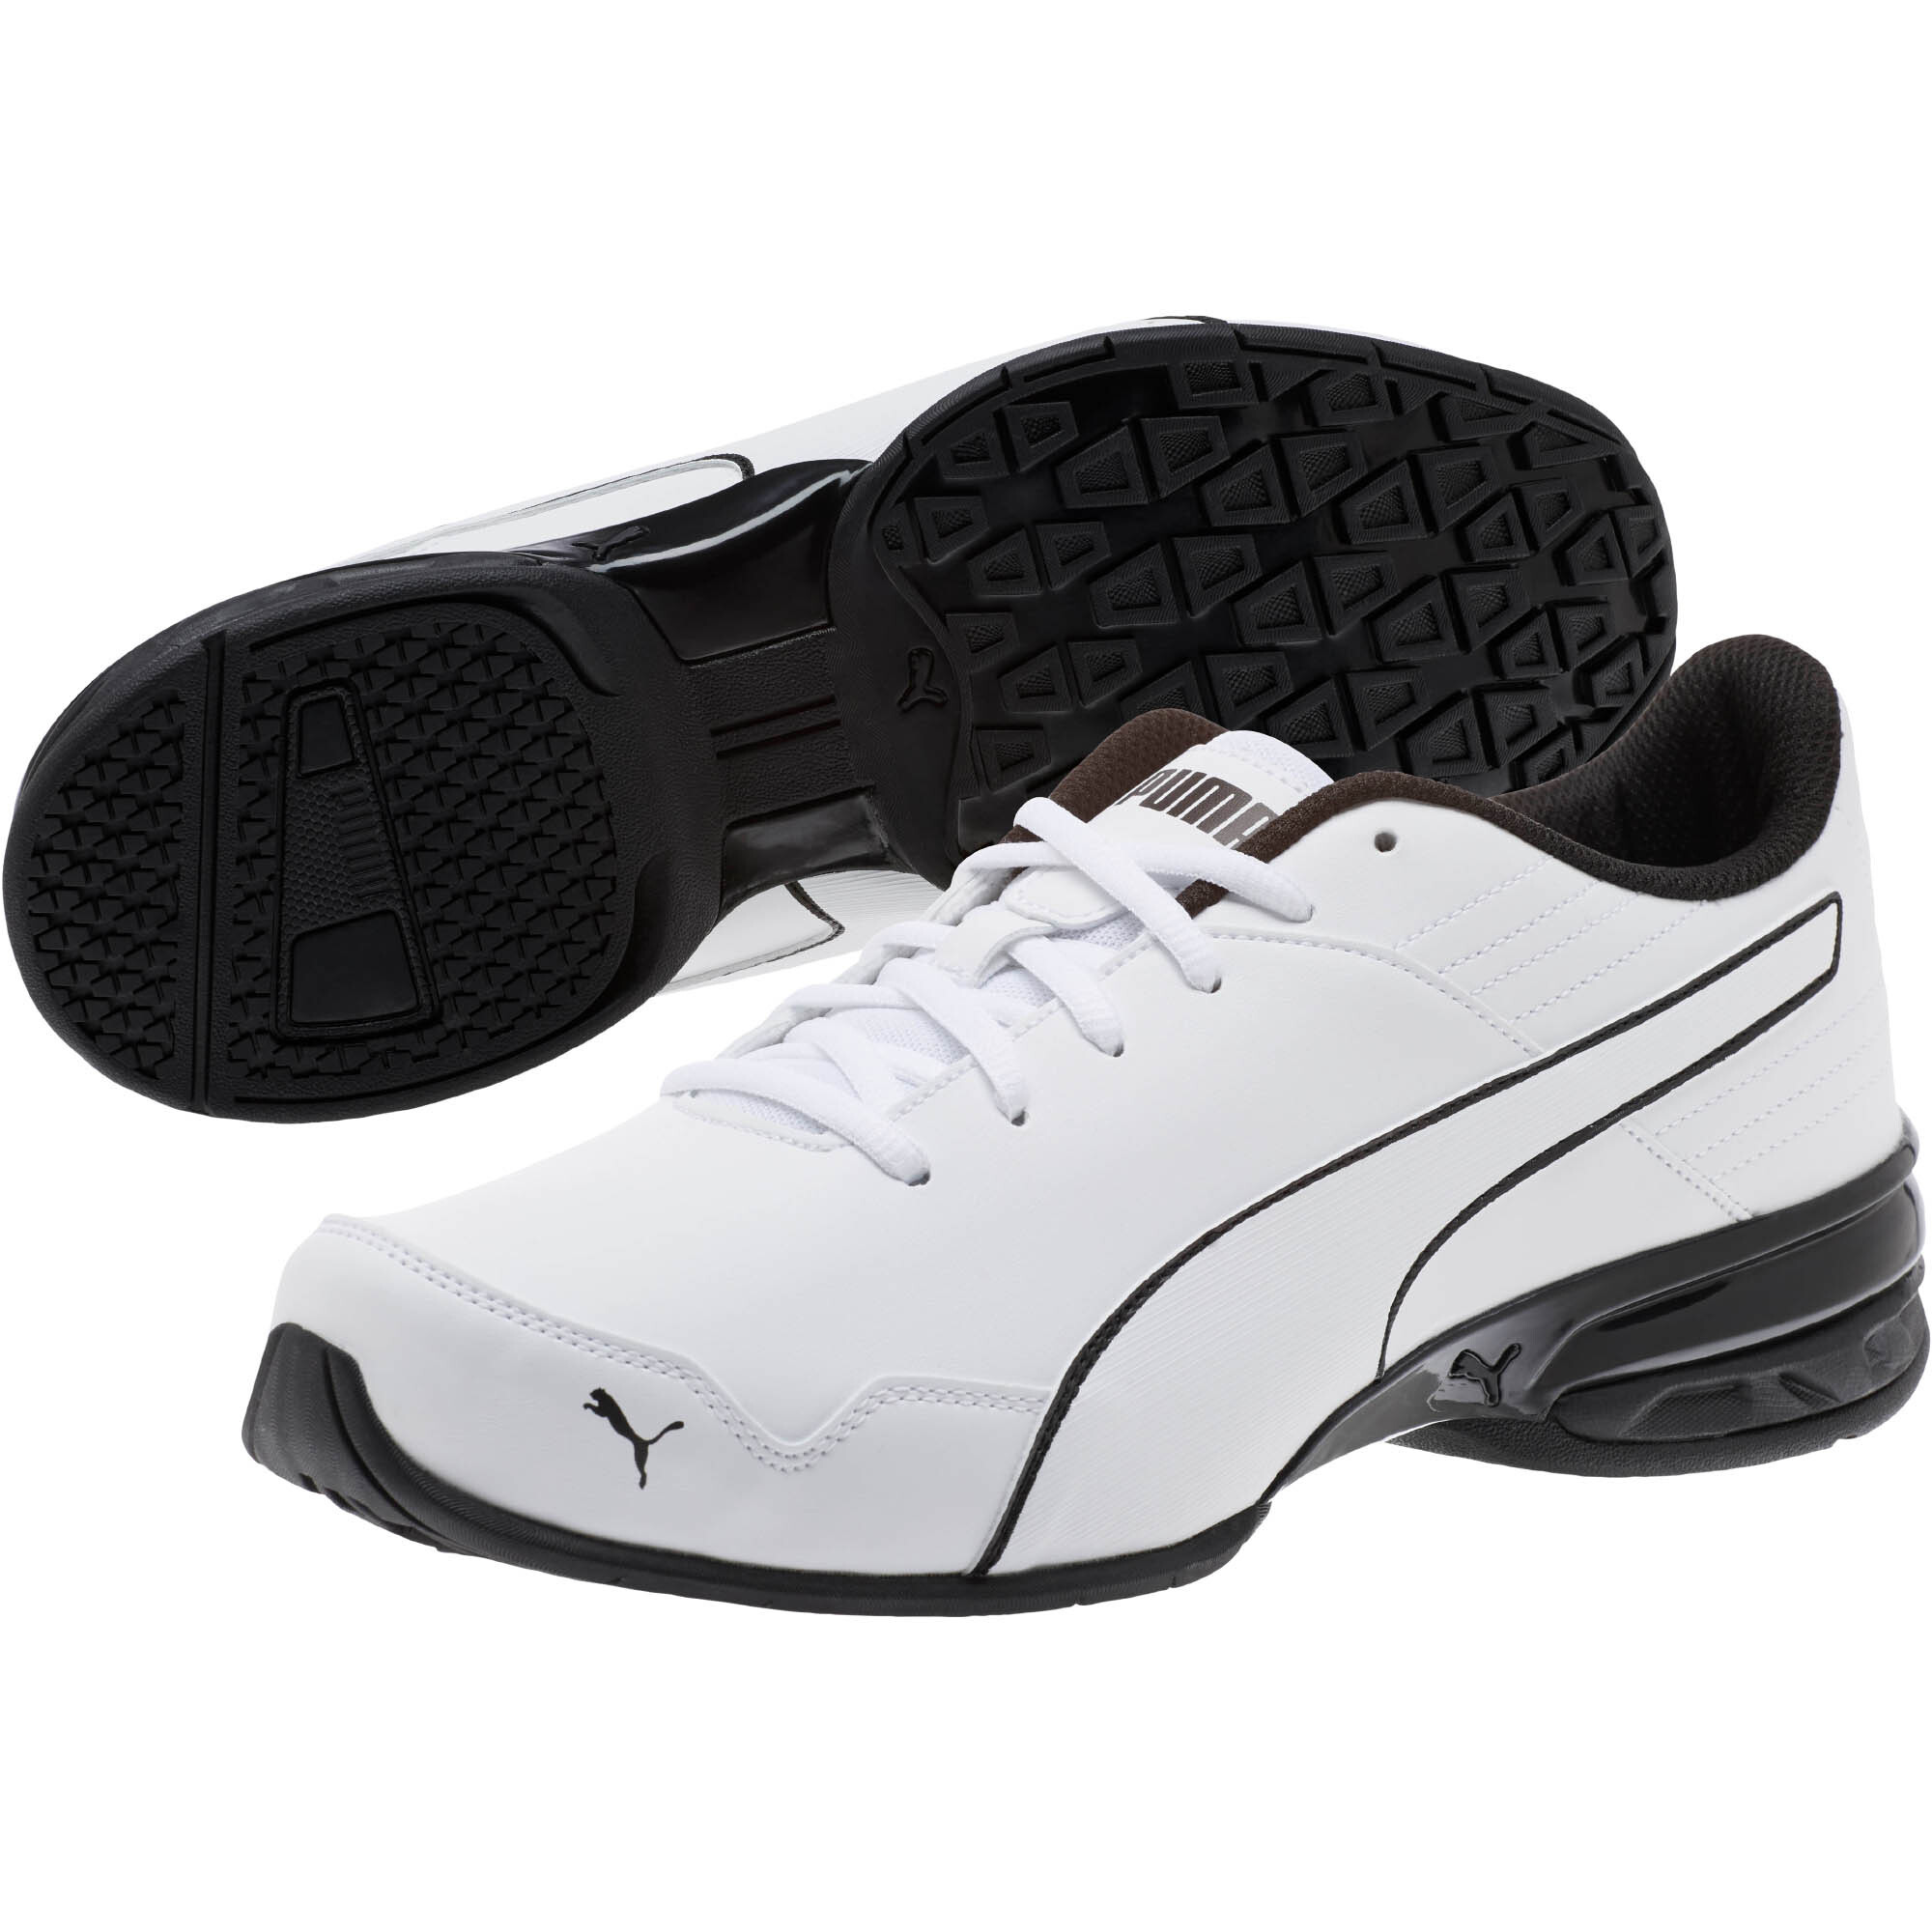 puma latest shoes for women